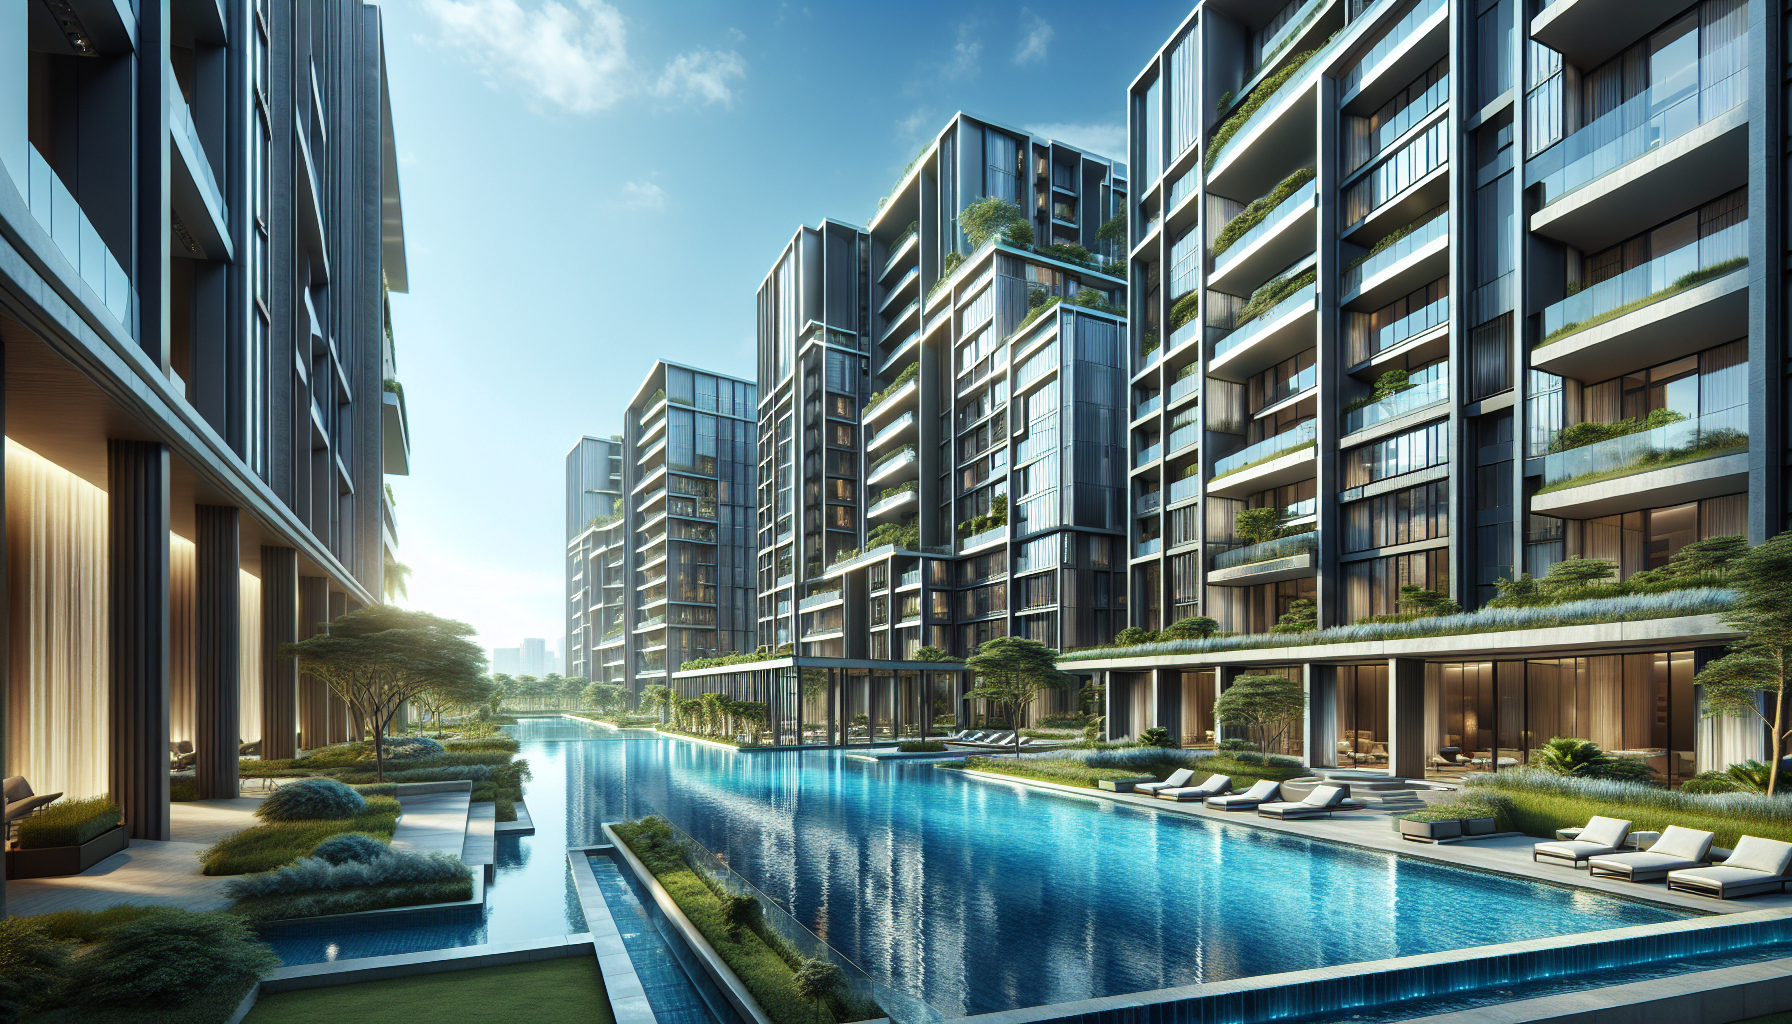 An apartment complex with a swimming pool, ideal for Apartment Investment Strategies.